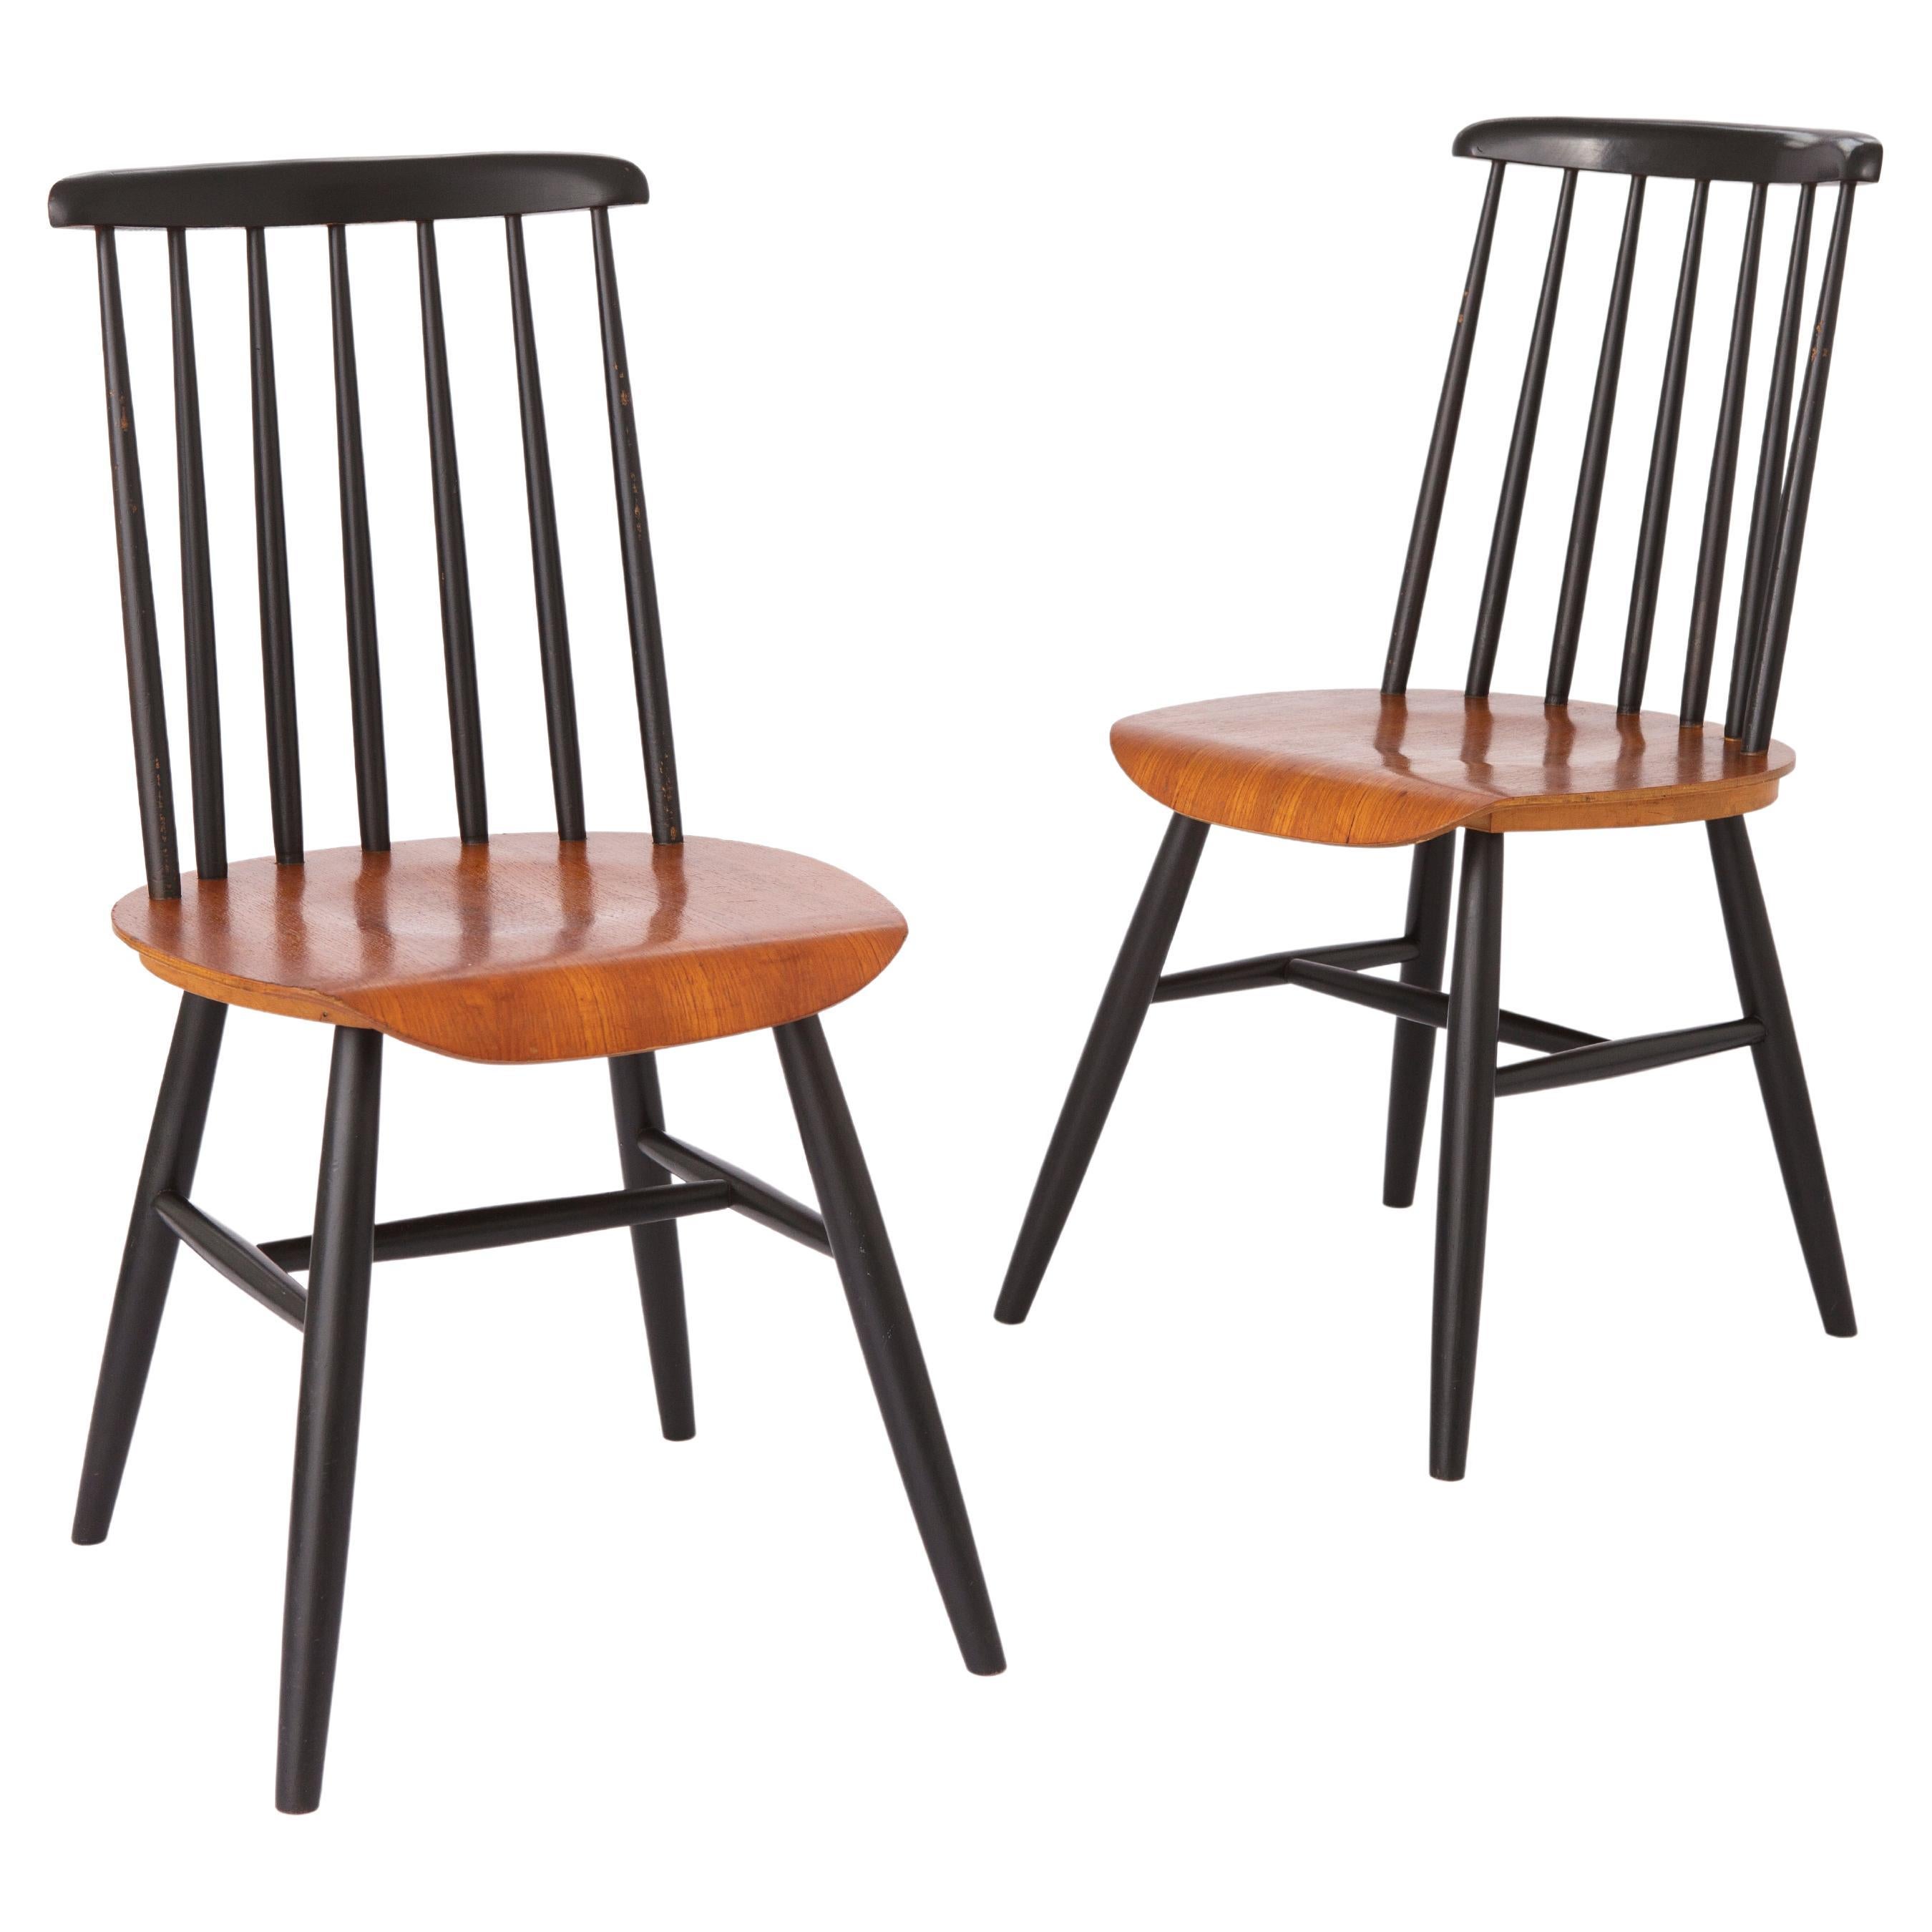 2 Vintage Spindle Back Chairs 1960s-1970s - Sweden For Sale